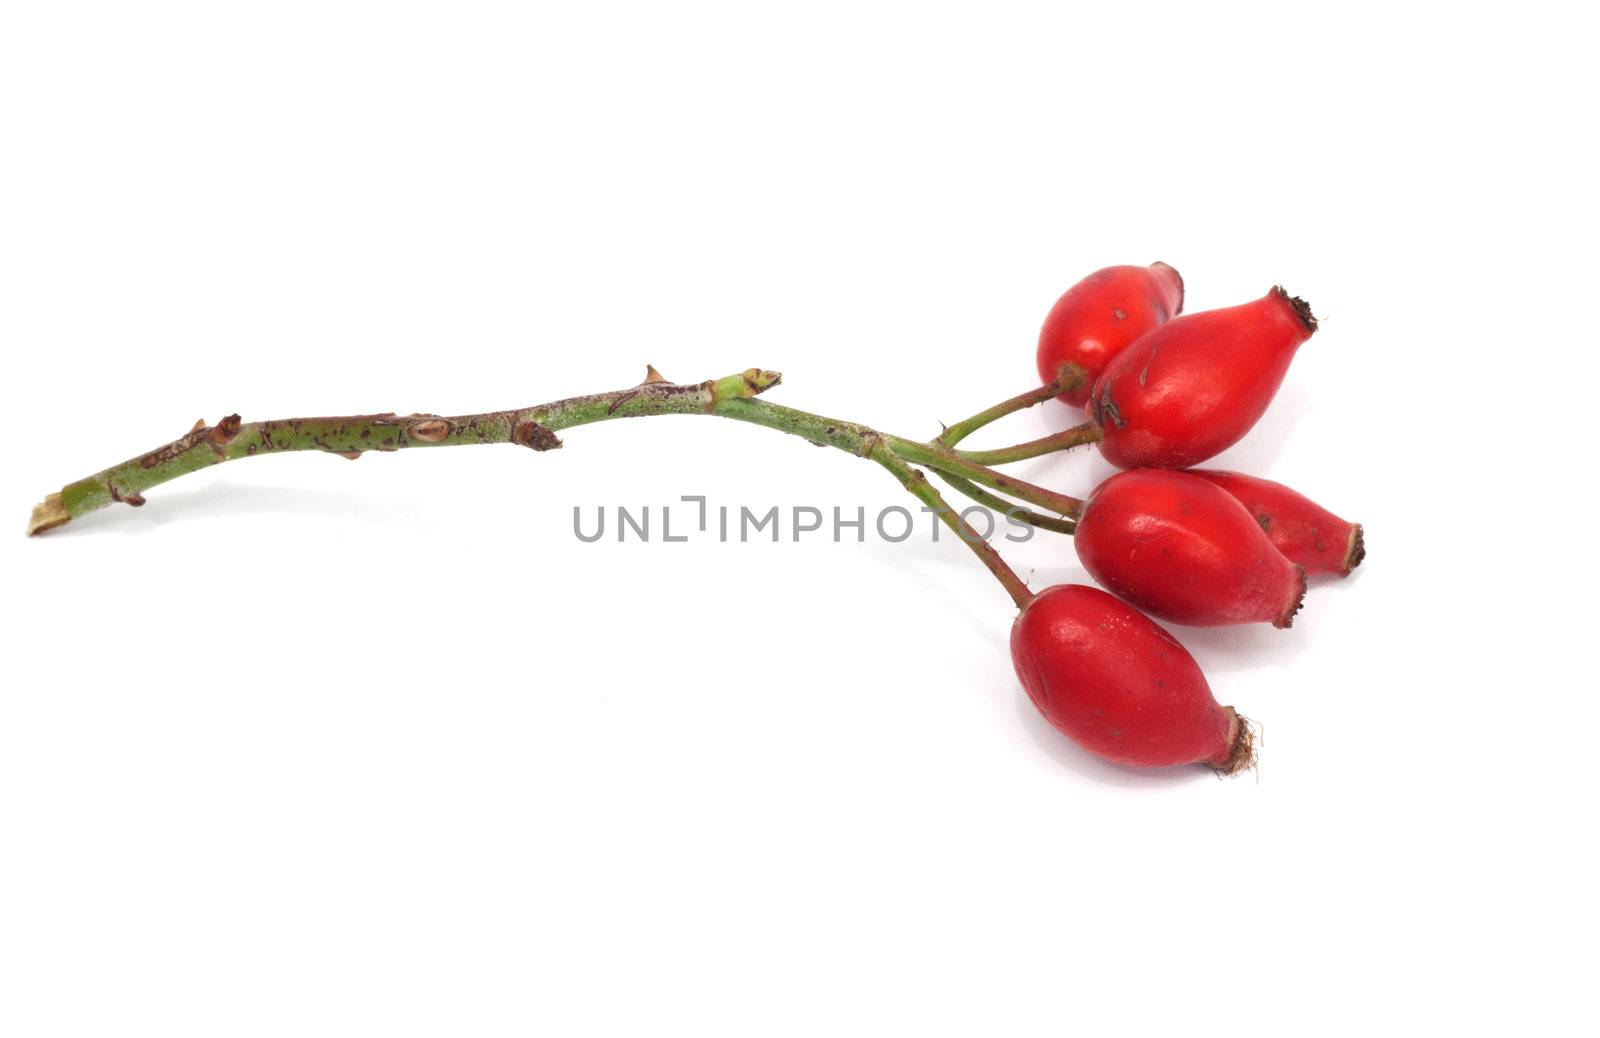 Fruits of wild rose on a white background 